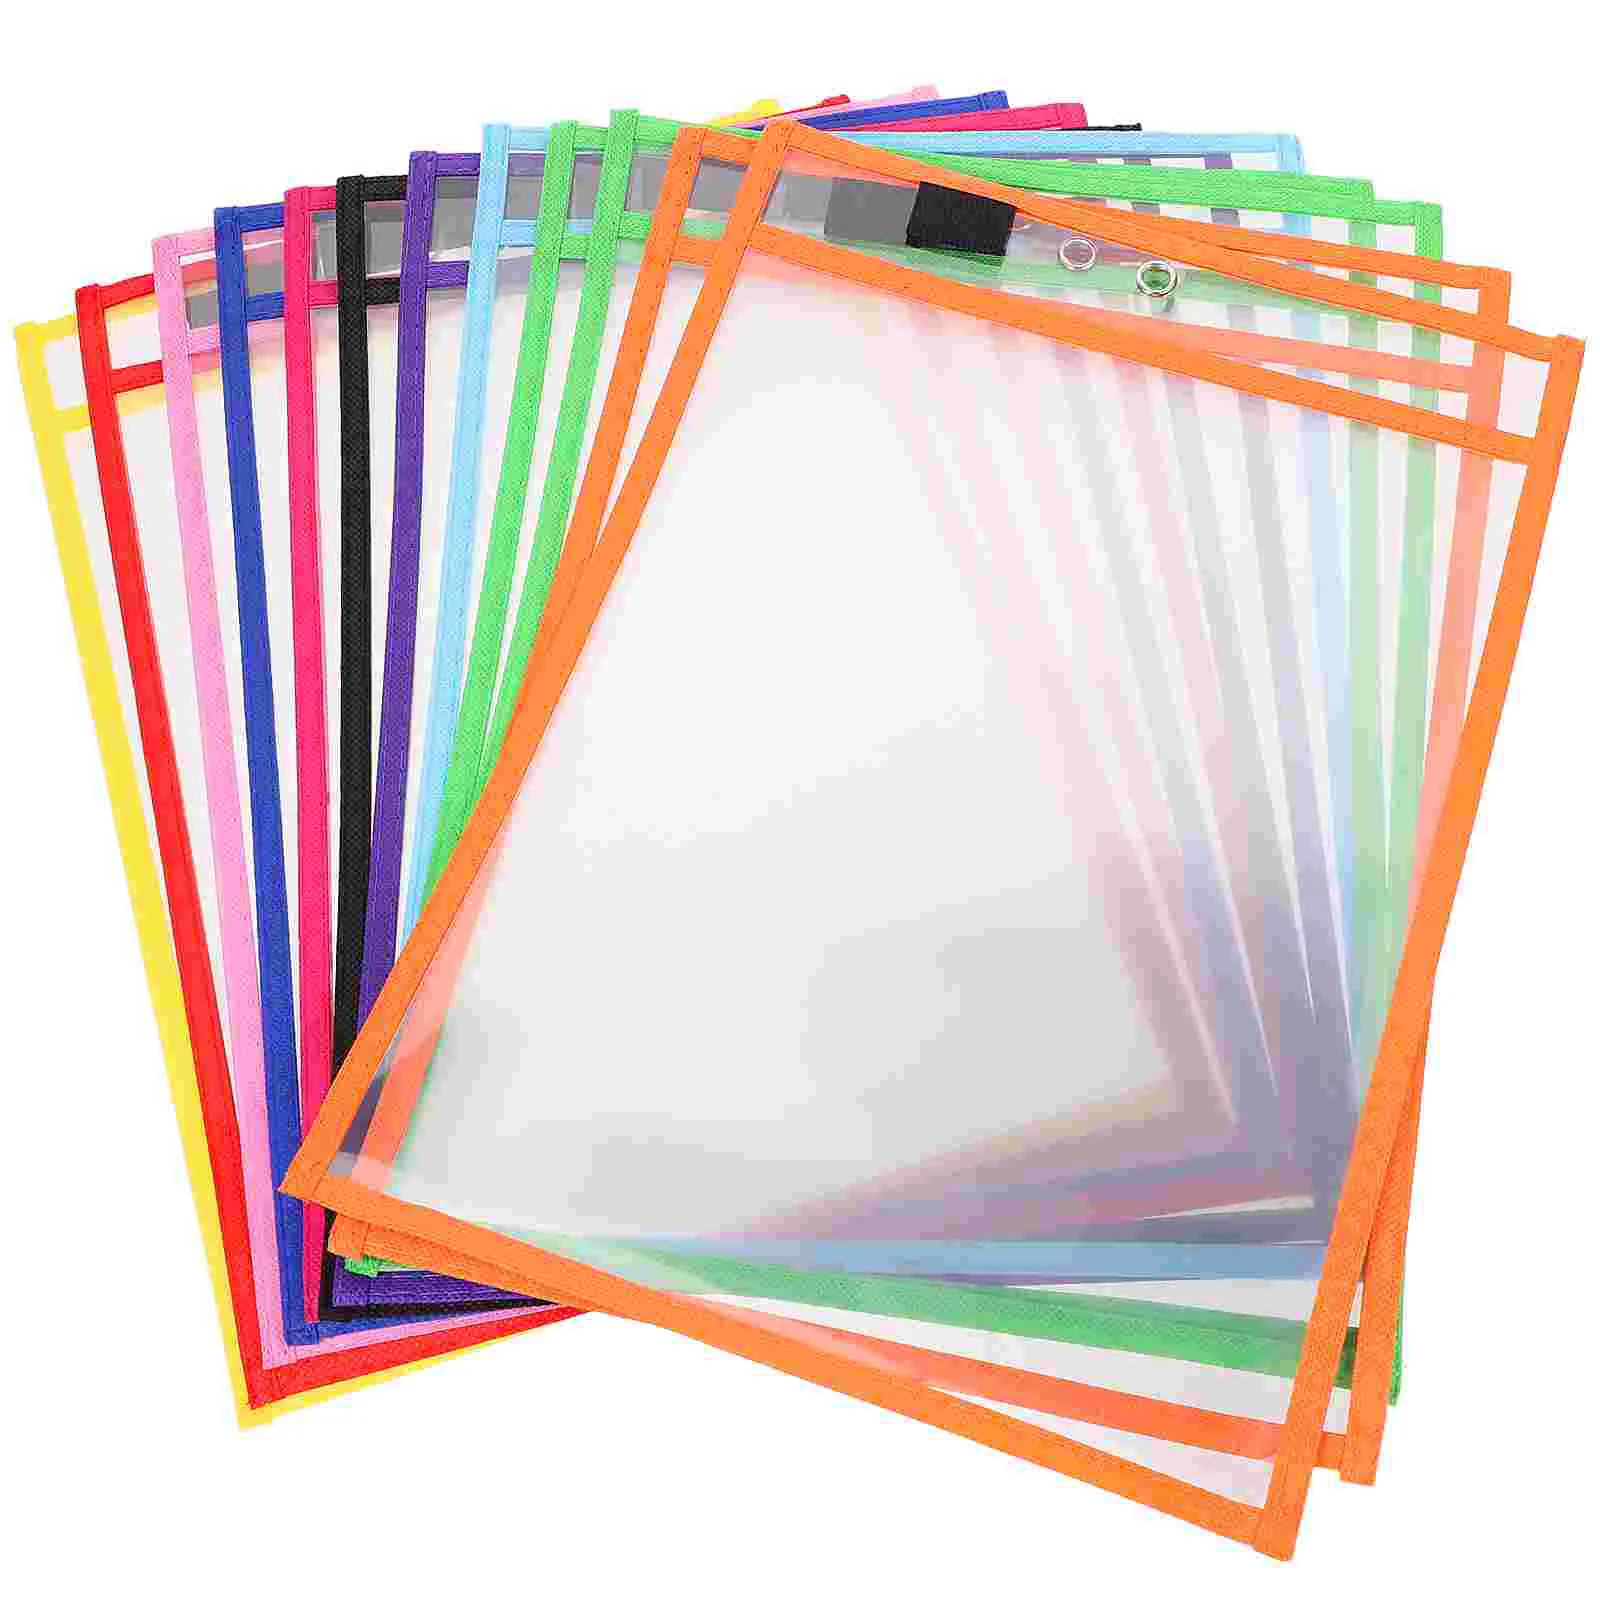 

12pcs Reusable Dry Erase Pockets Assorted Colors Stationery Supplies for Office School with Pen Case (Random Color)